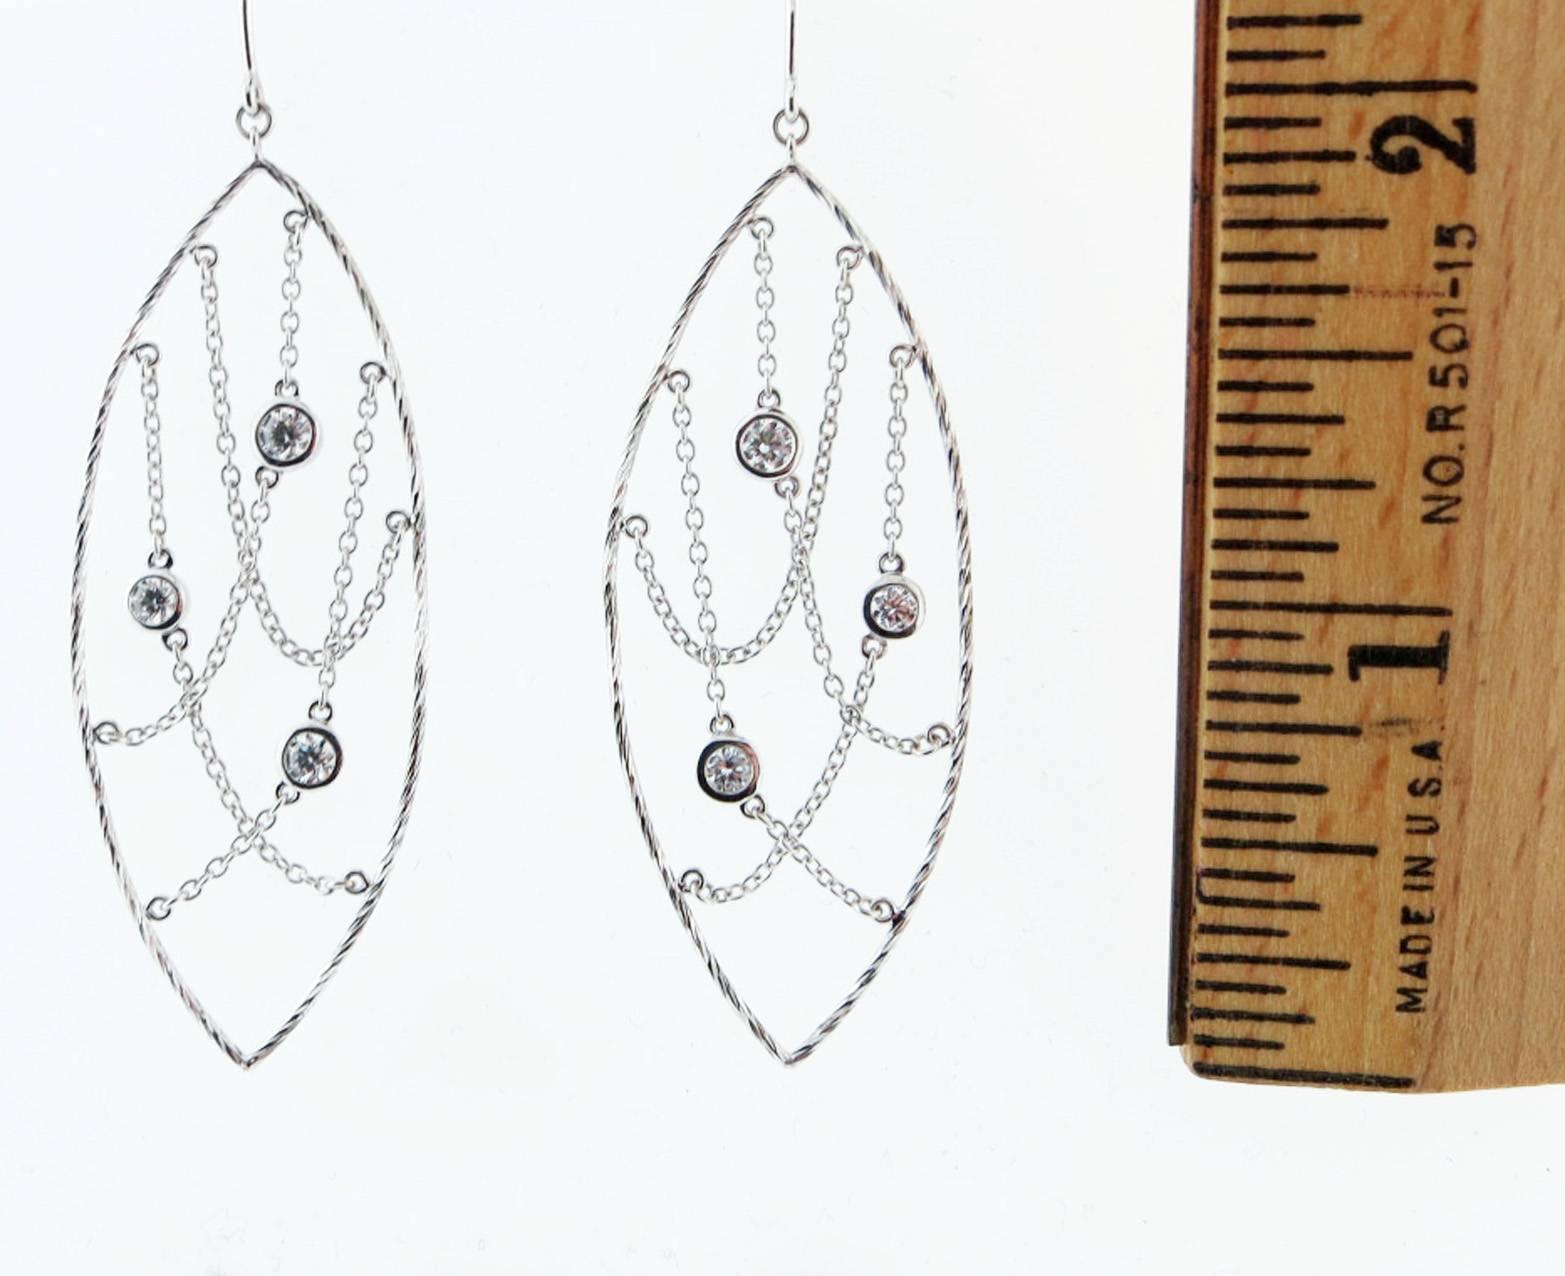 Sensational 18kt. white gold earrings with lots of movement , each earring measures 2 1/4 inches in length, the center of the marquise frame is suspended with three bezel set Hearts on Fire diamonds, lots of dangle and  jiggle ! Easy and fun to